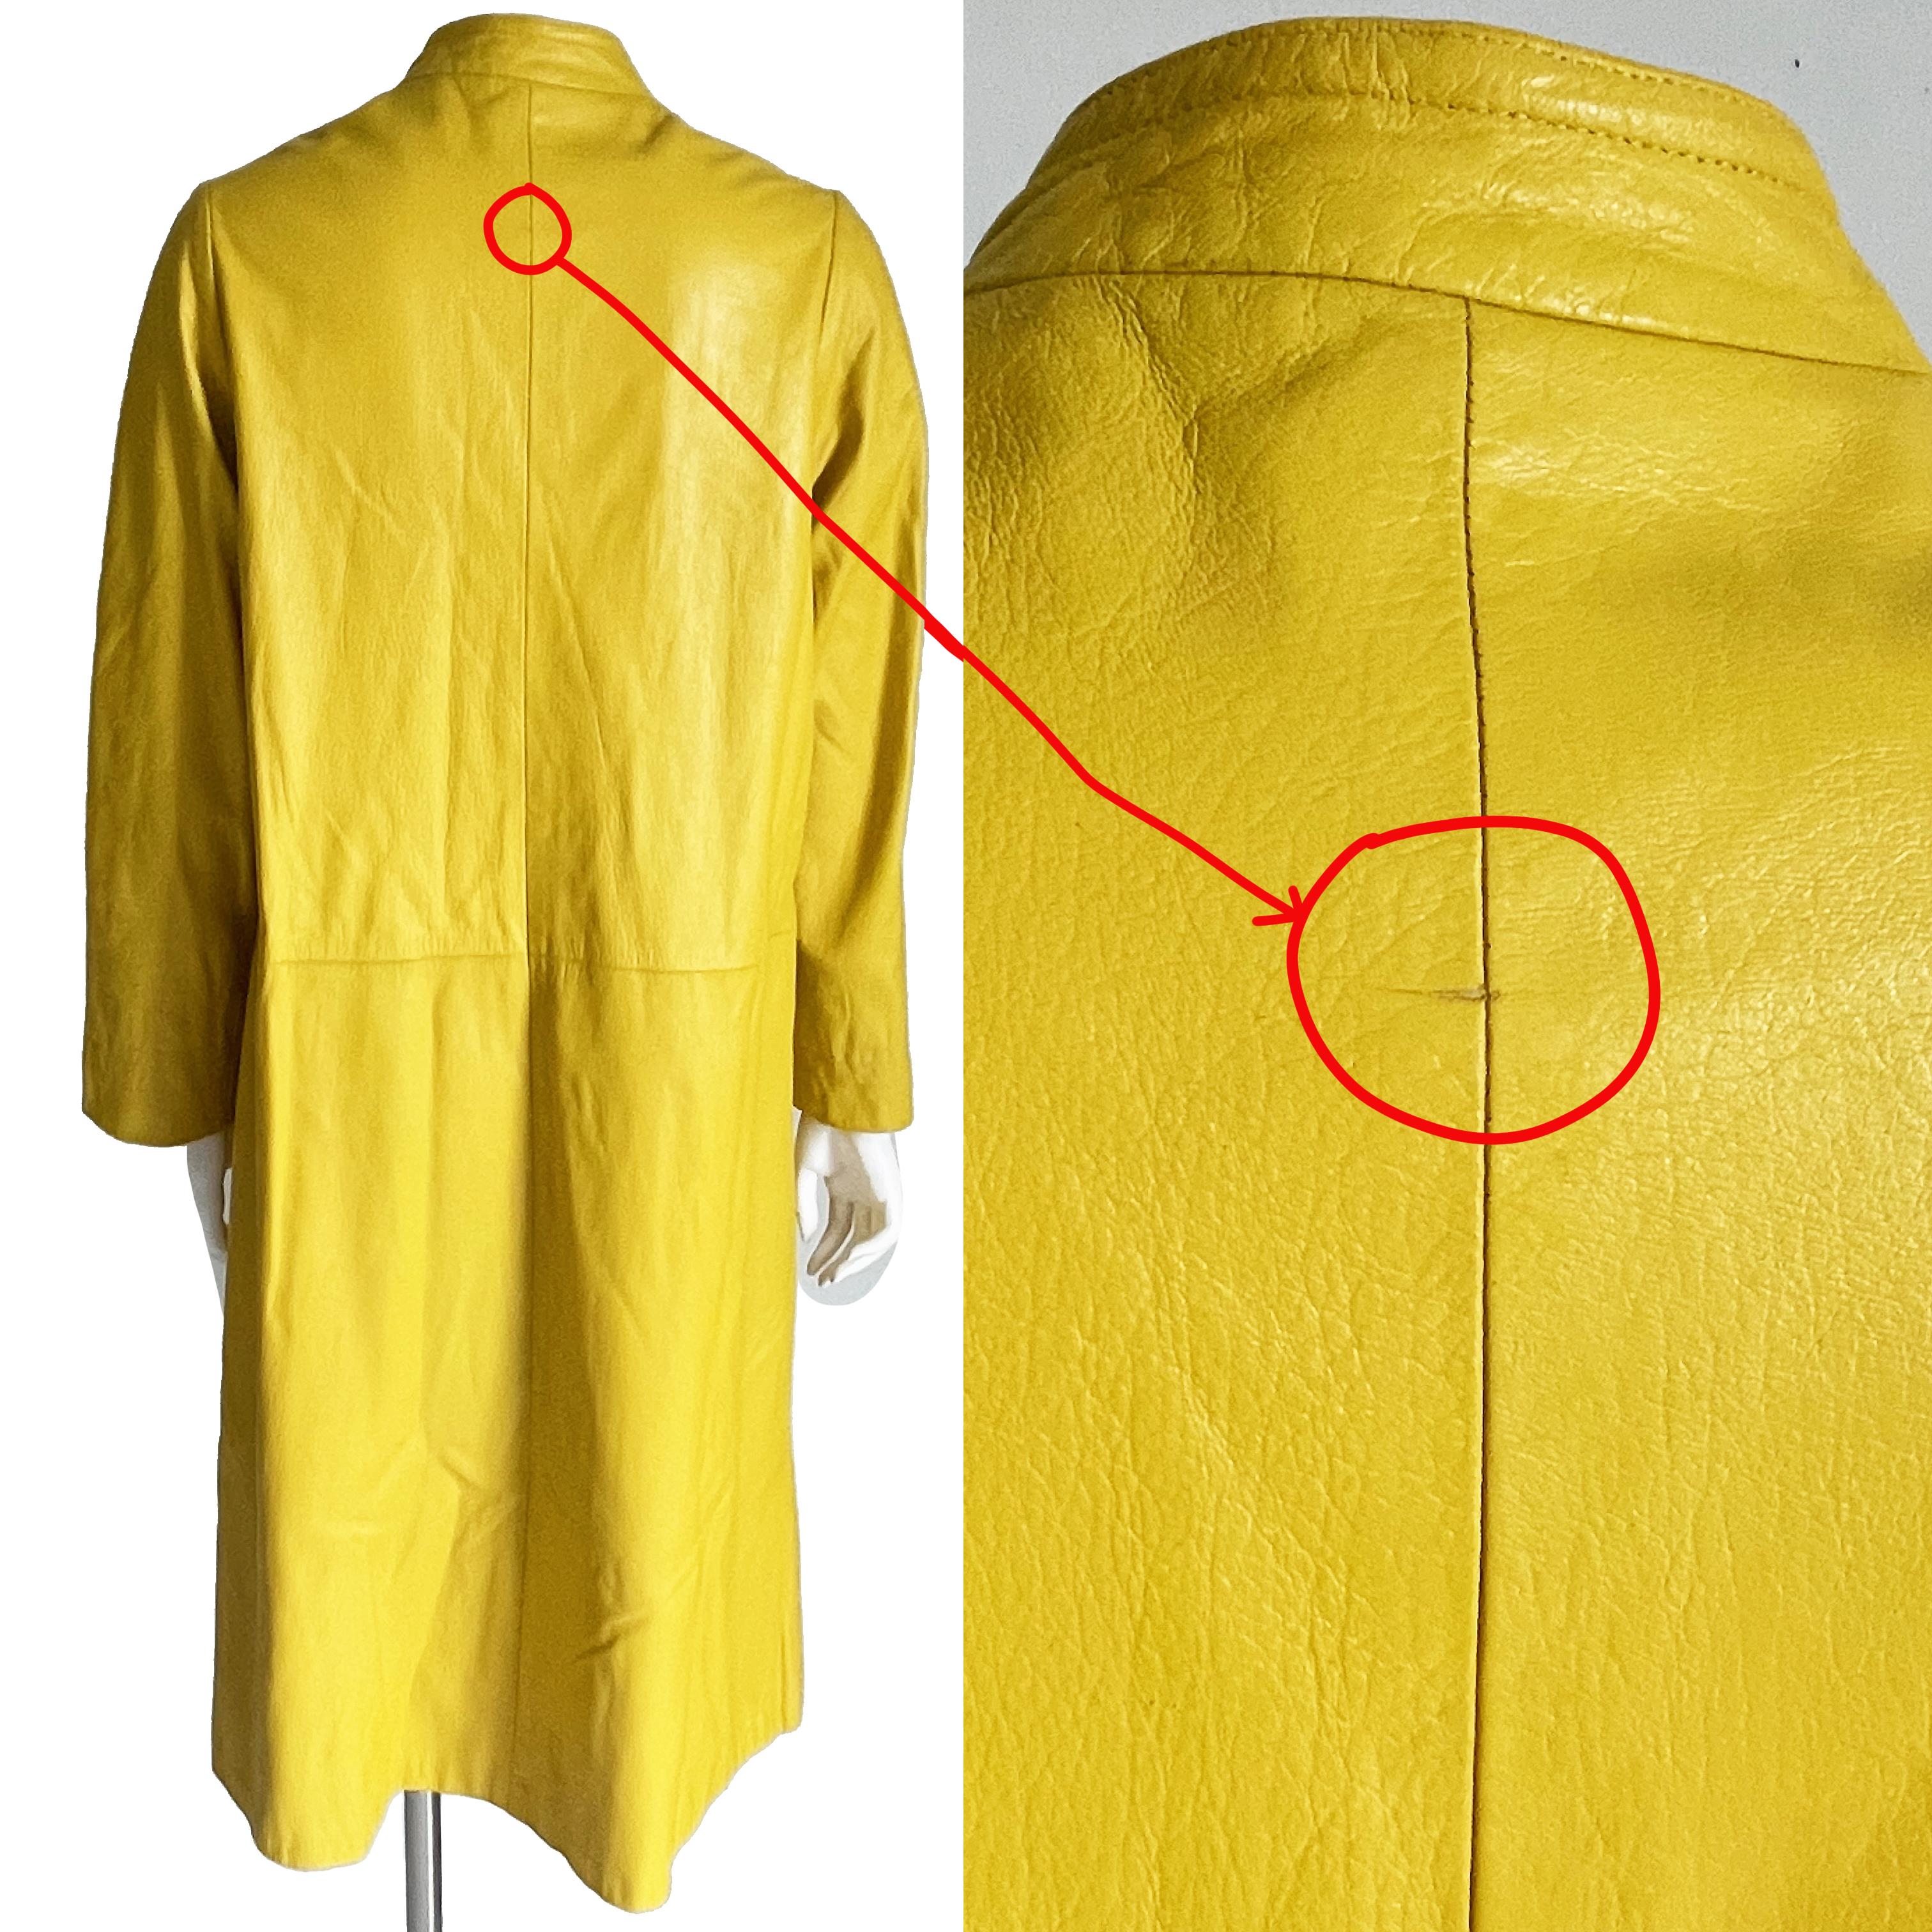 Bonnie Cashin for Sills Coat Long Leather Jacket Bright Yellow Mod Vintage 60s  For Sale 4